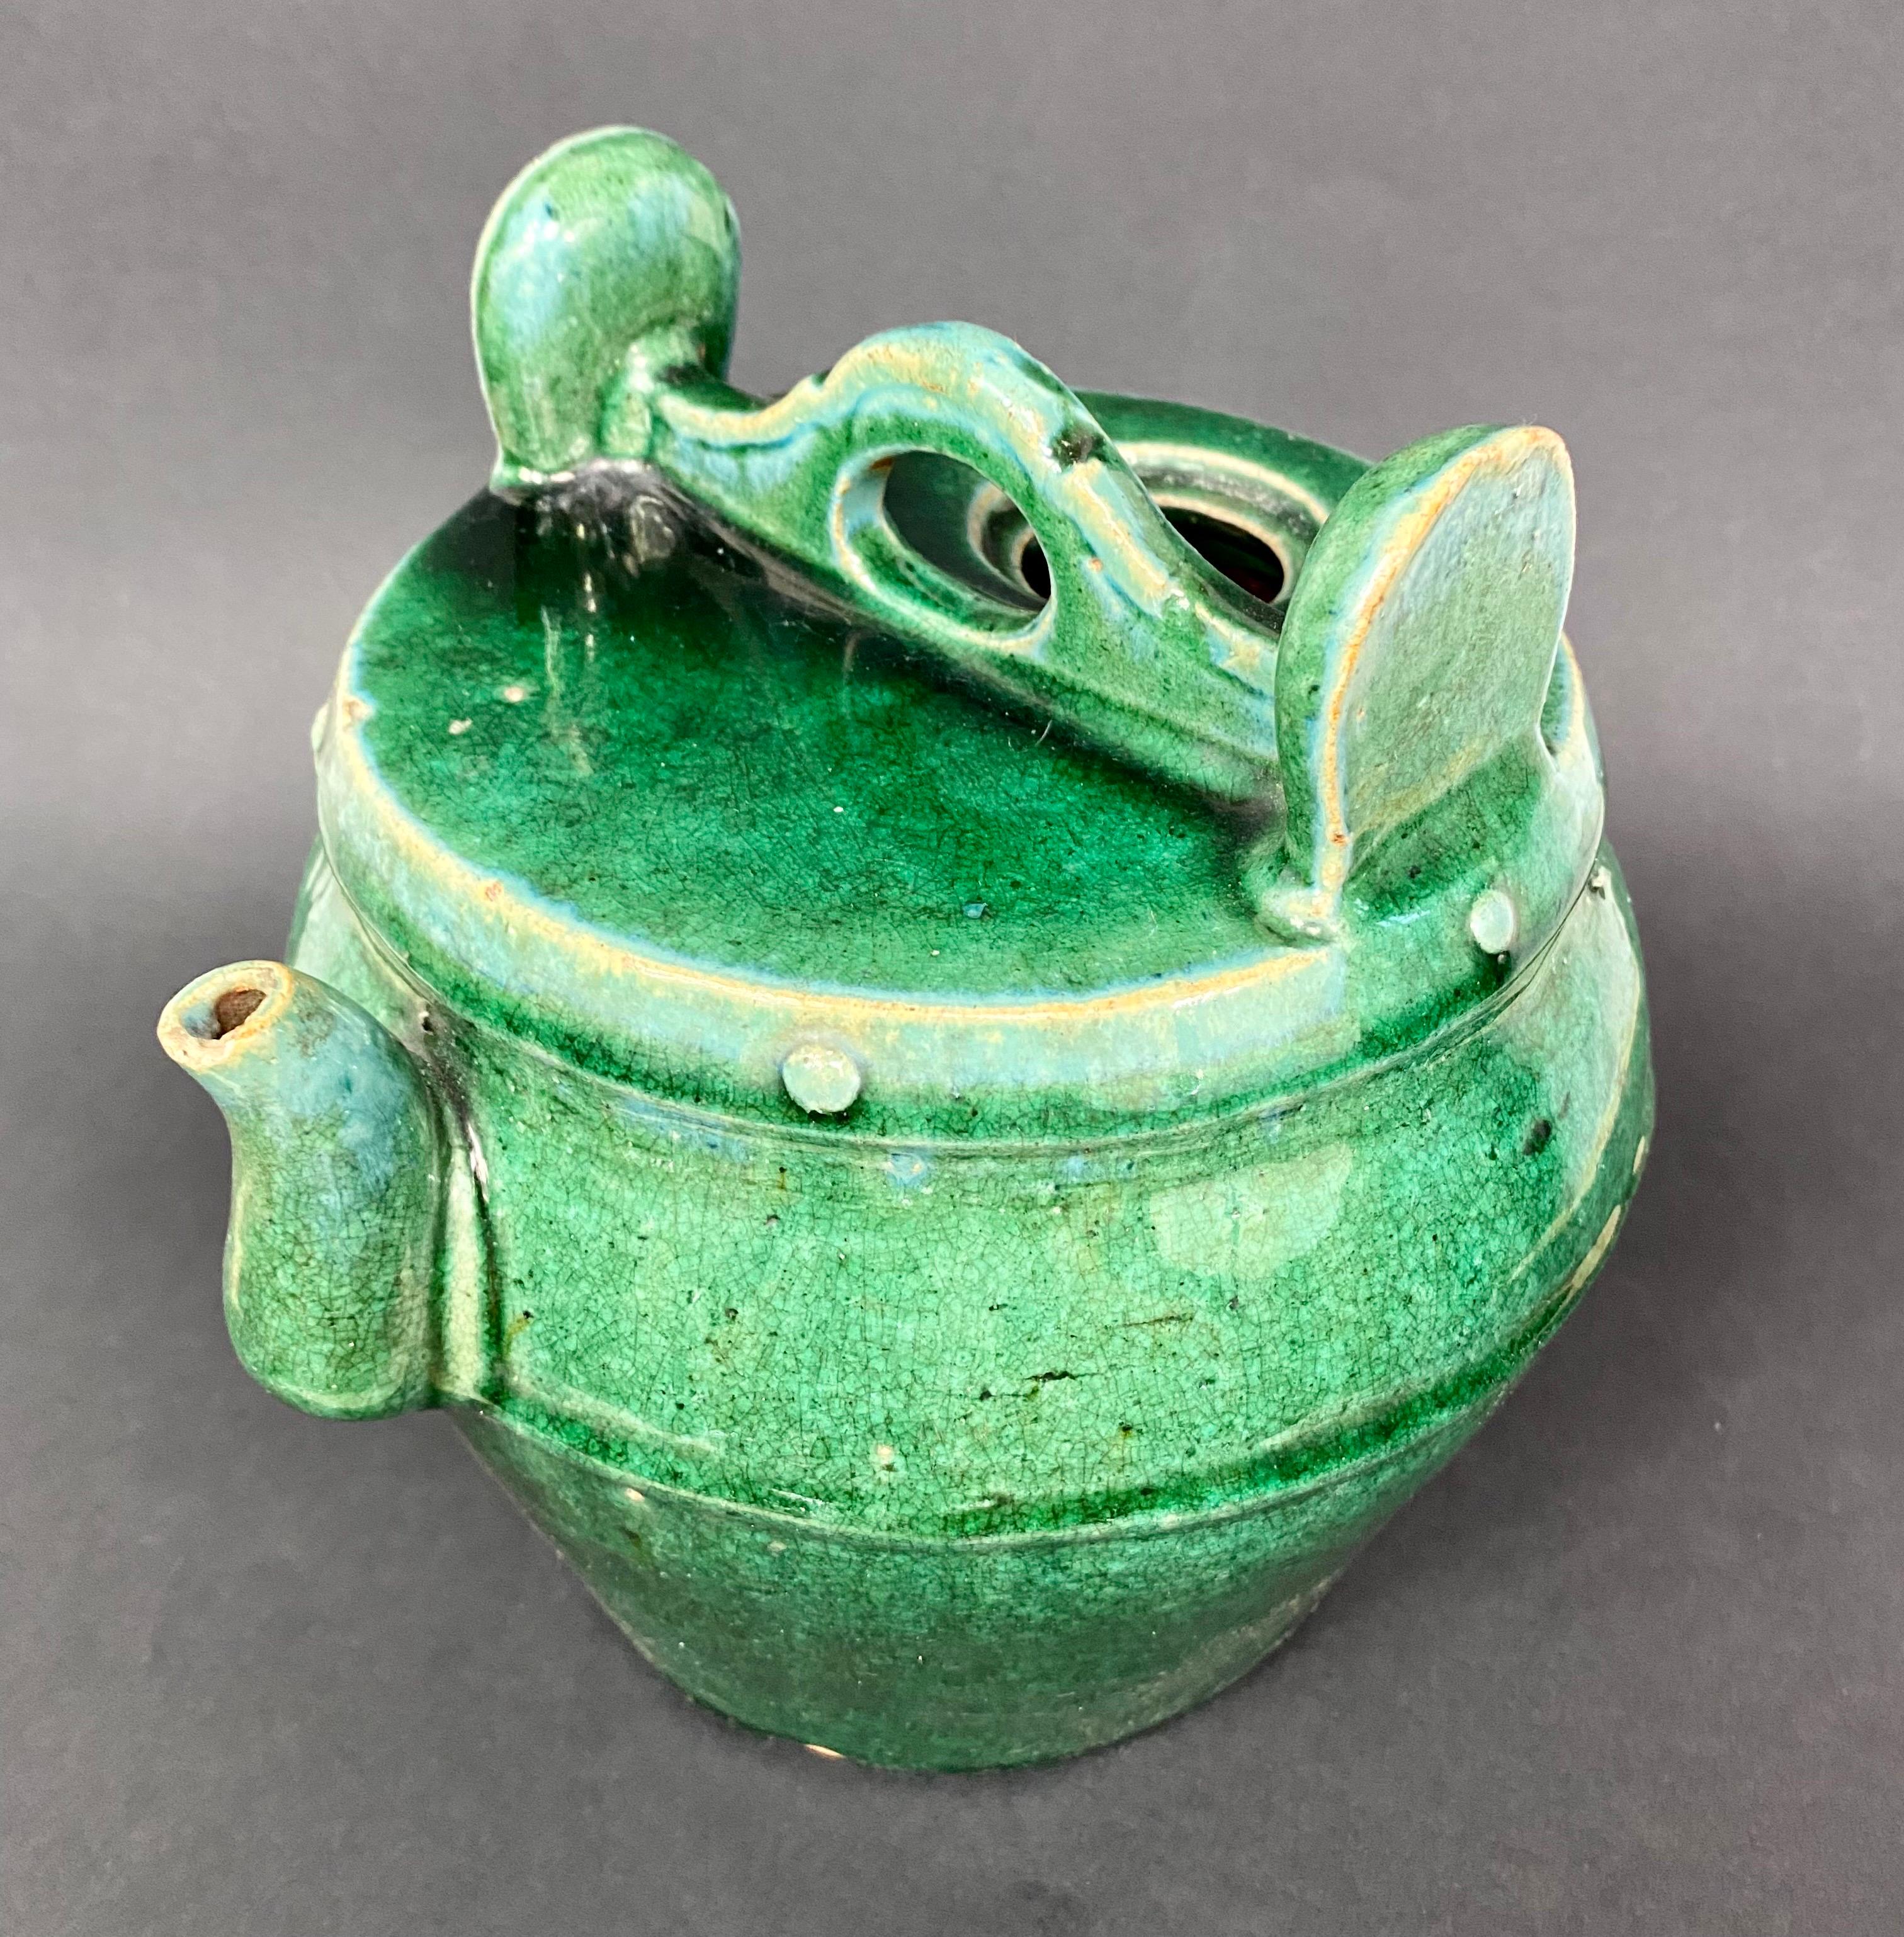 Ceramic teapot or liquor jug with beautiful green crackle glaze. This type of carafe was traditionally used to serve Huangjiu, an alcohol made from cereals (wheat, millet, rice, etc.) which was consumed hot during meals. This alcohol is similar to